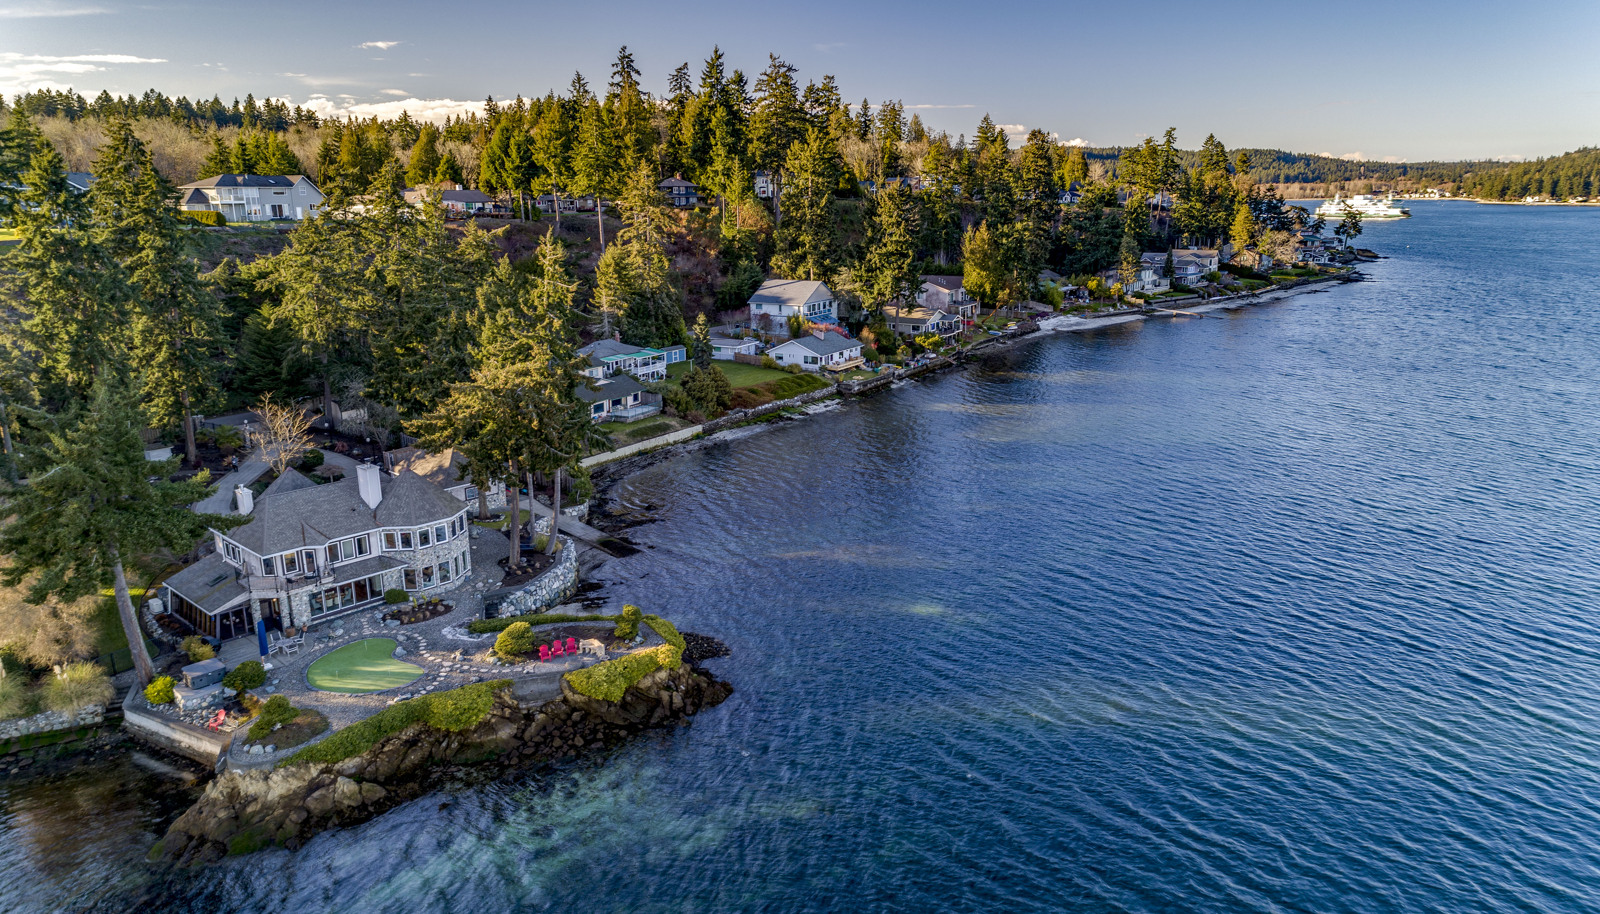 You have likely never seen a waterfront property quite like this! Now there is a direct ferry service to Downtown Seattle from S